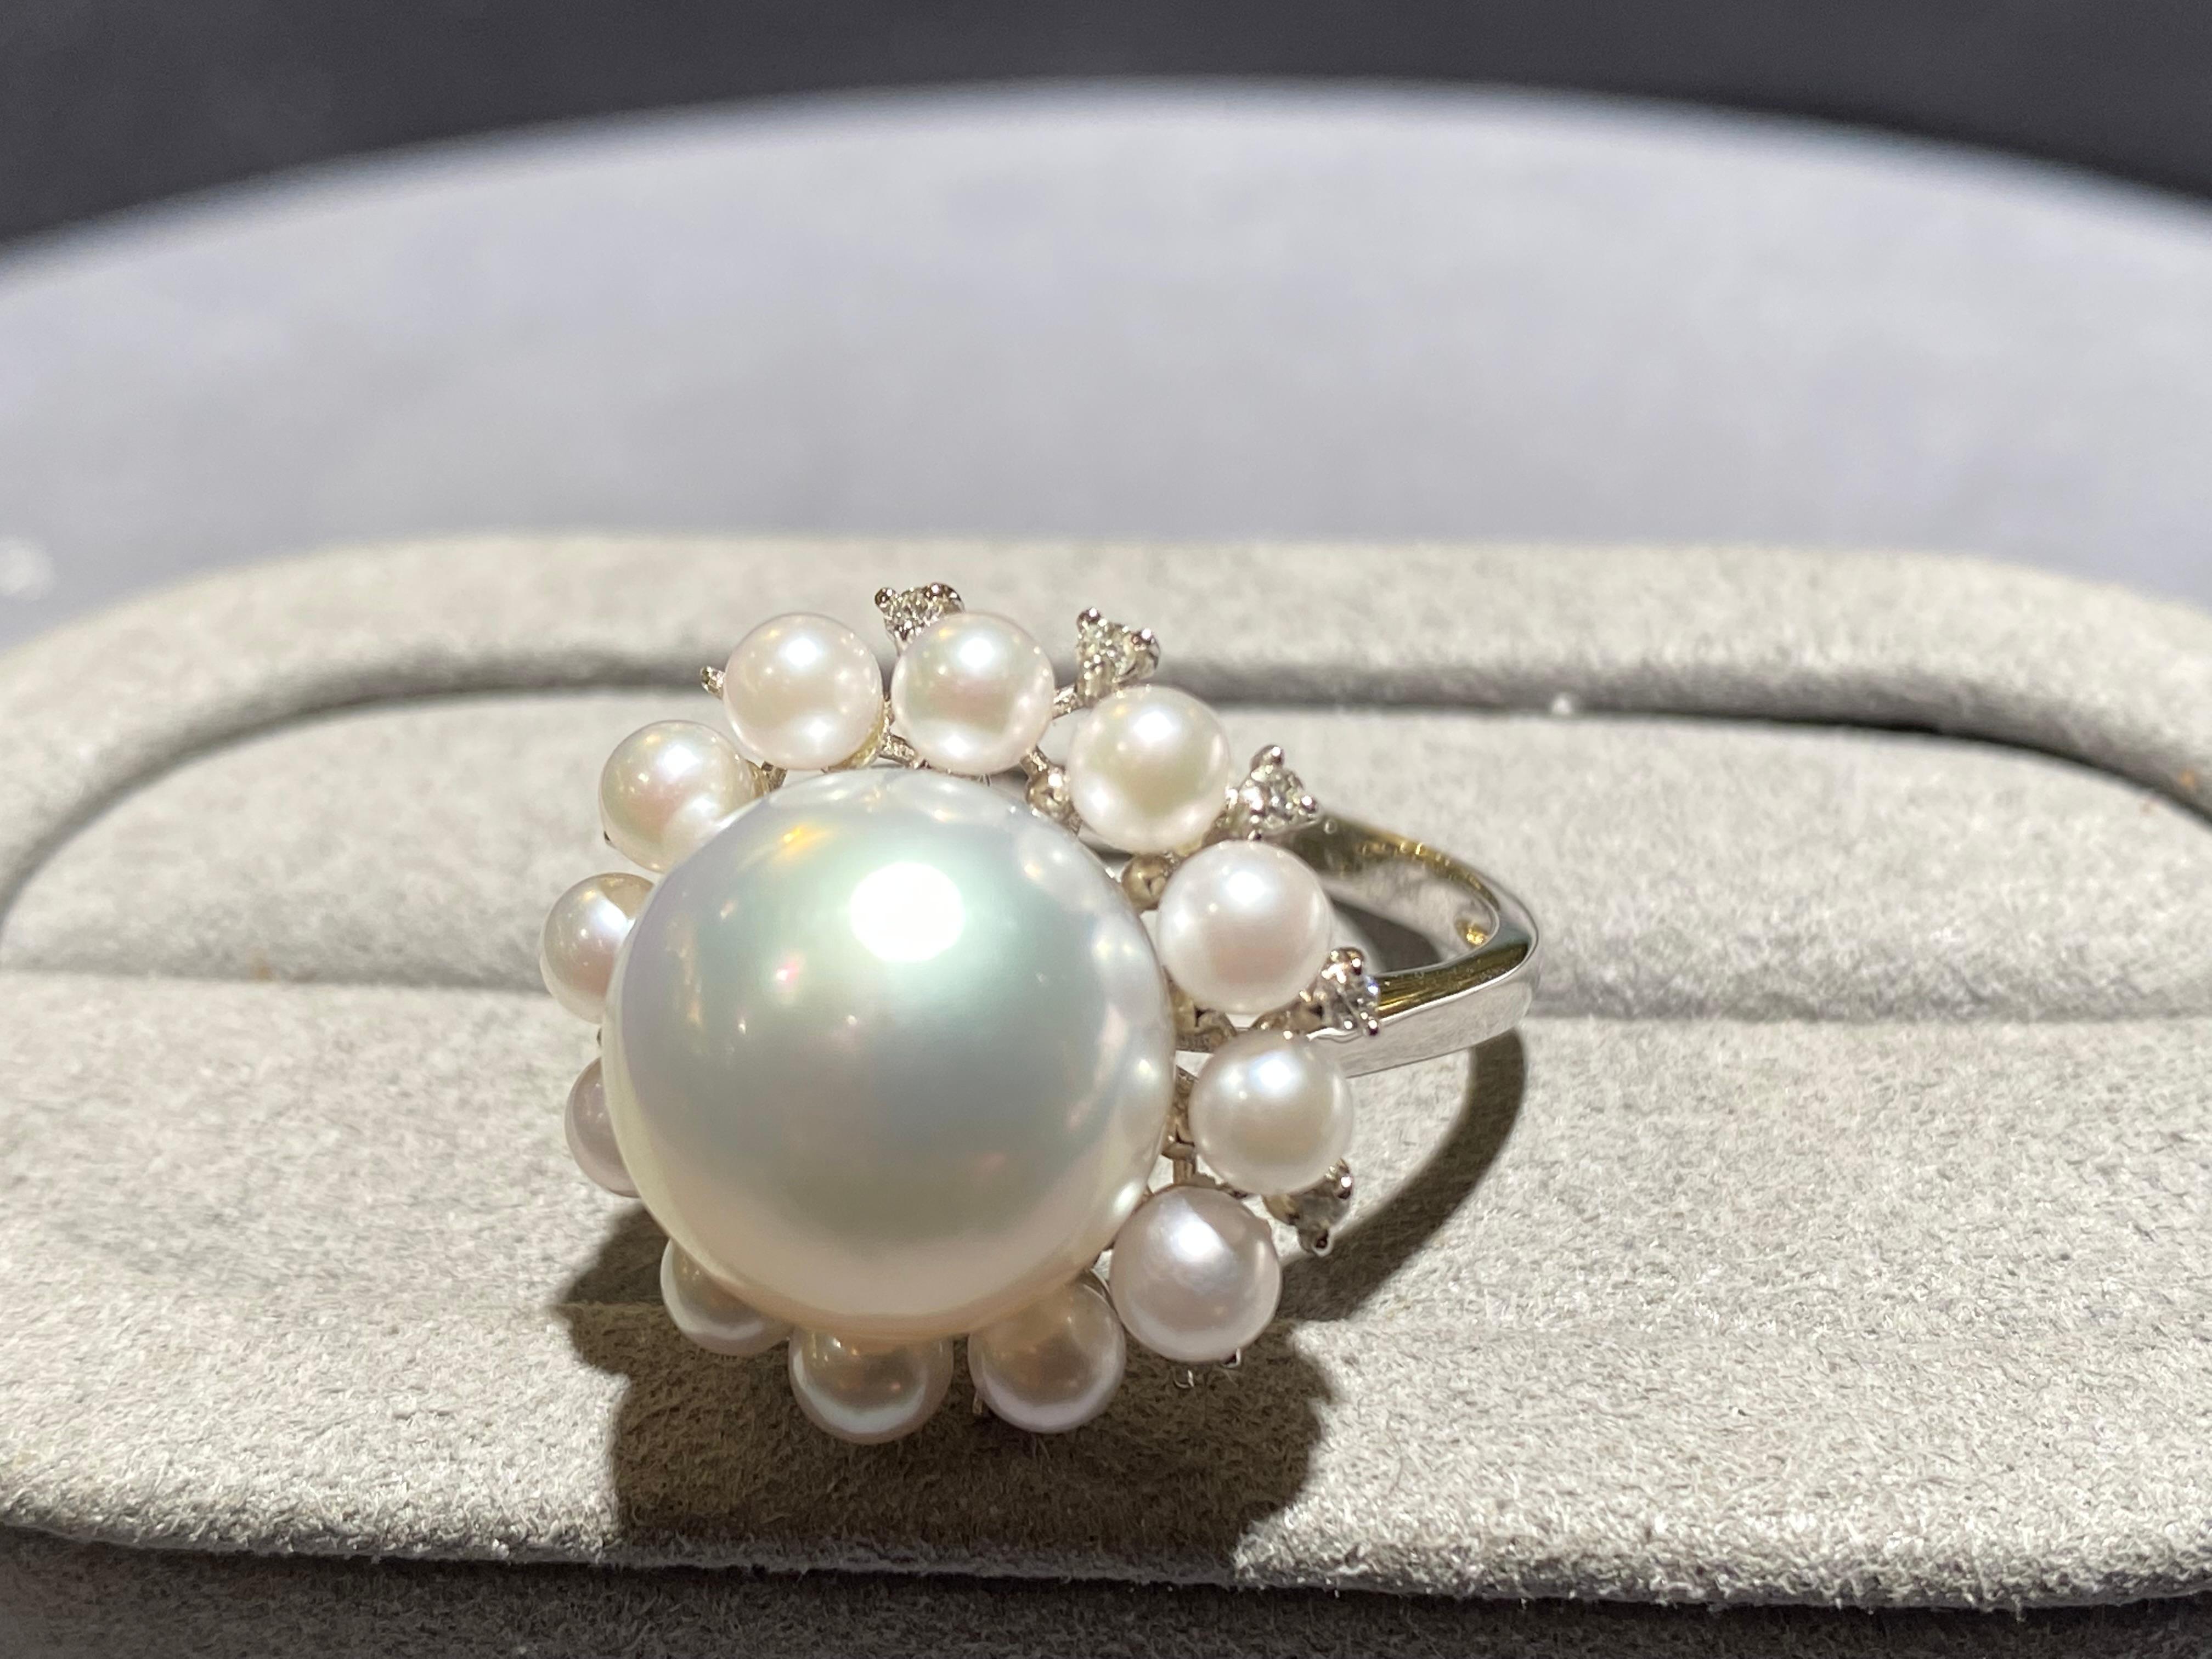 A 12.5 mm white Australian south sea pearl, seed pearl and diamond ring in 18k white gold. The white south sea pearl is surrounded by 12 seed pearls and 12 diamonds. It is a classical cluster design and is perfect for any occasions. The south sea